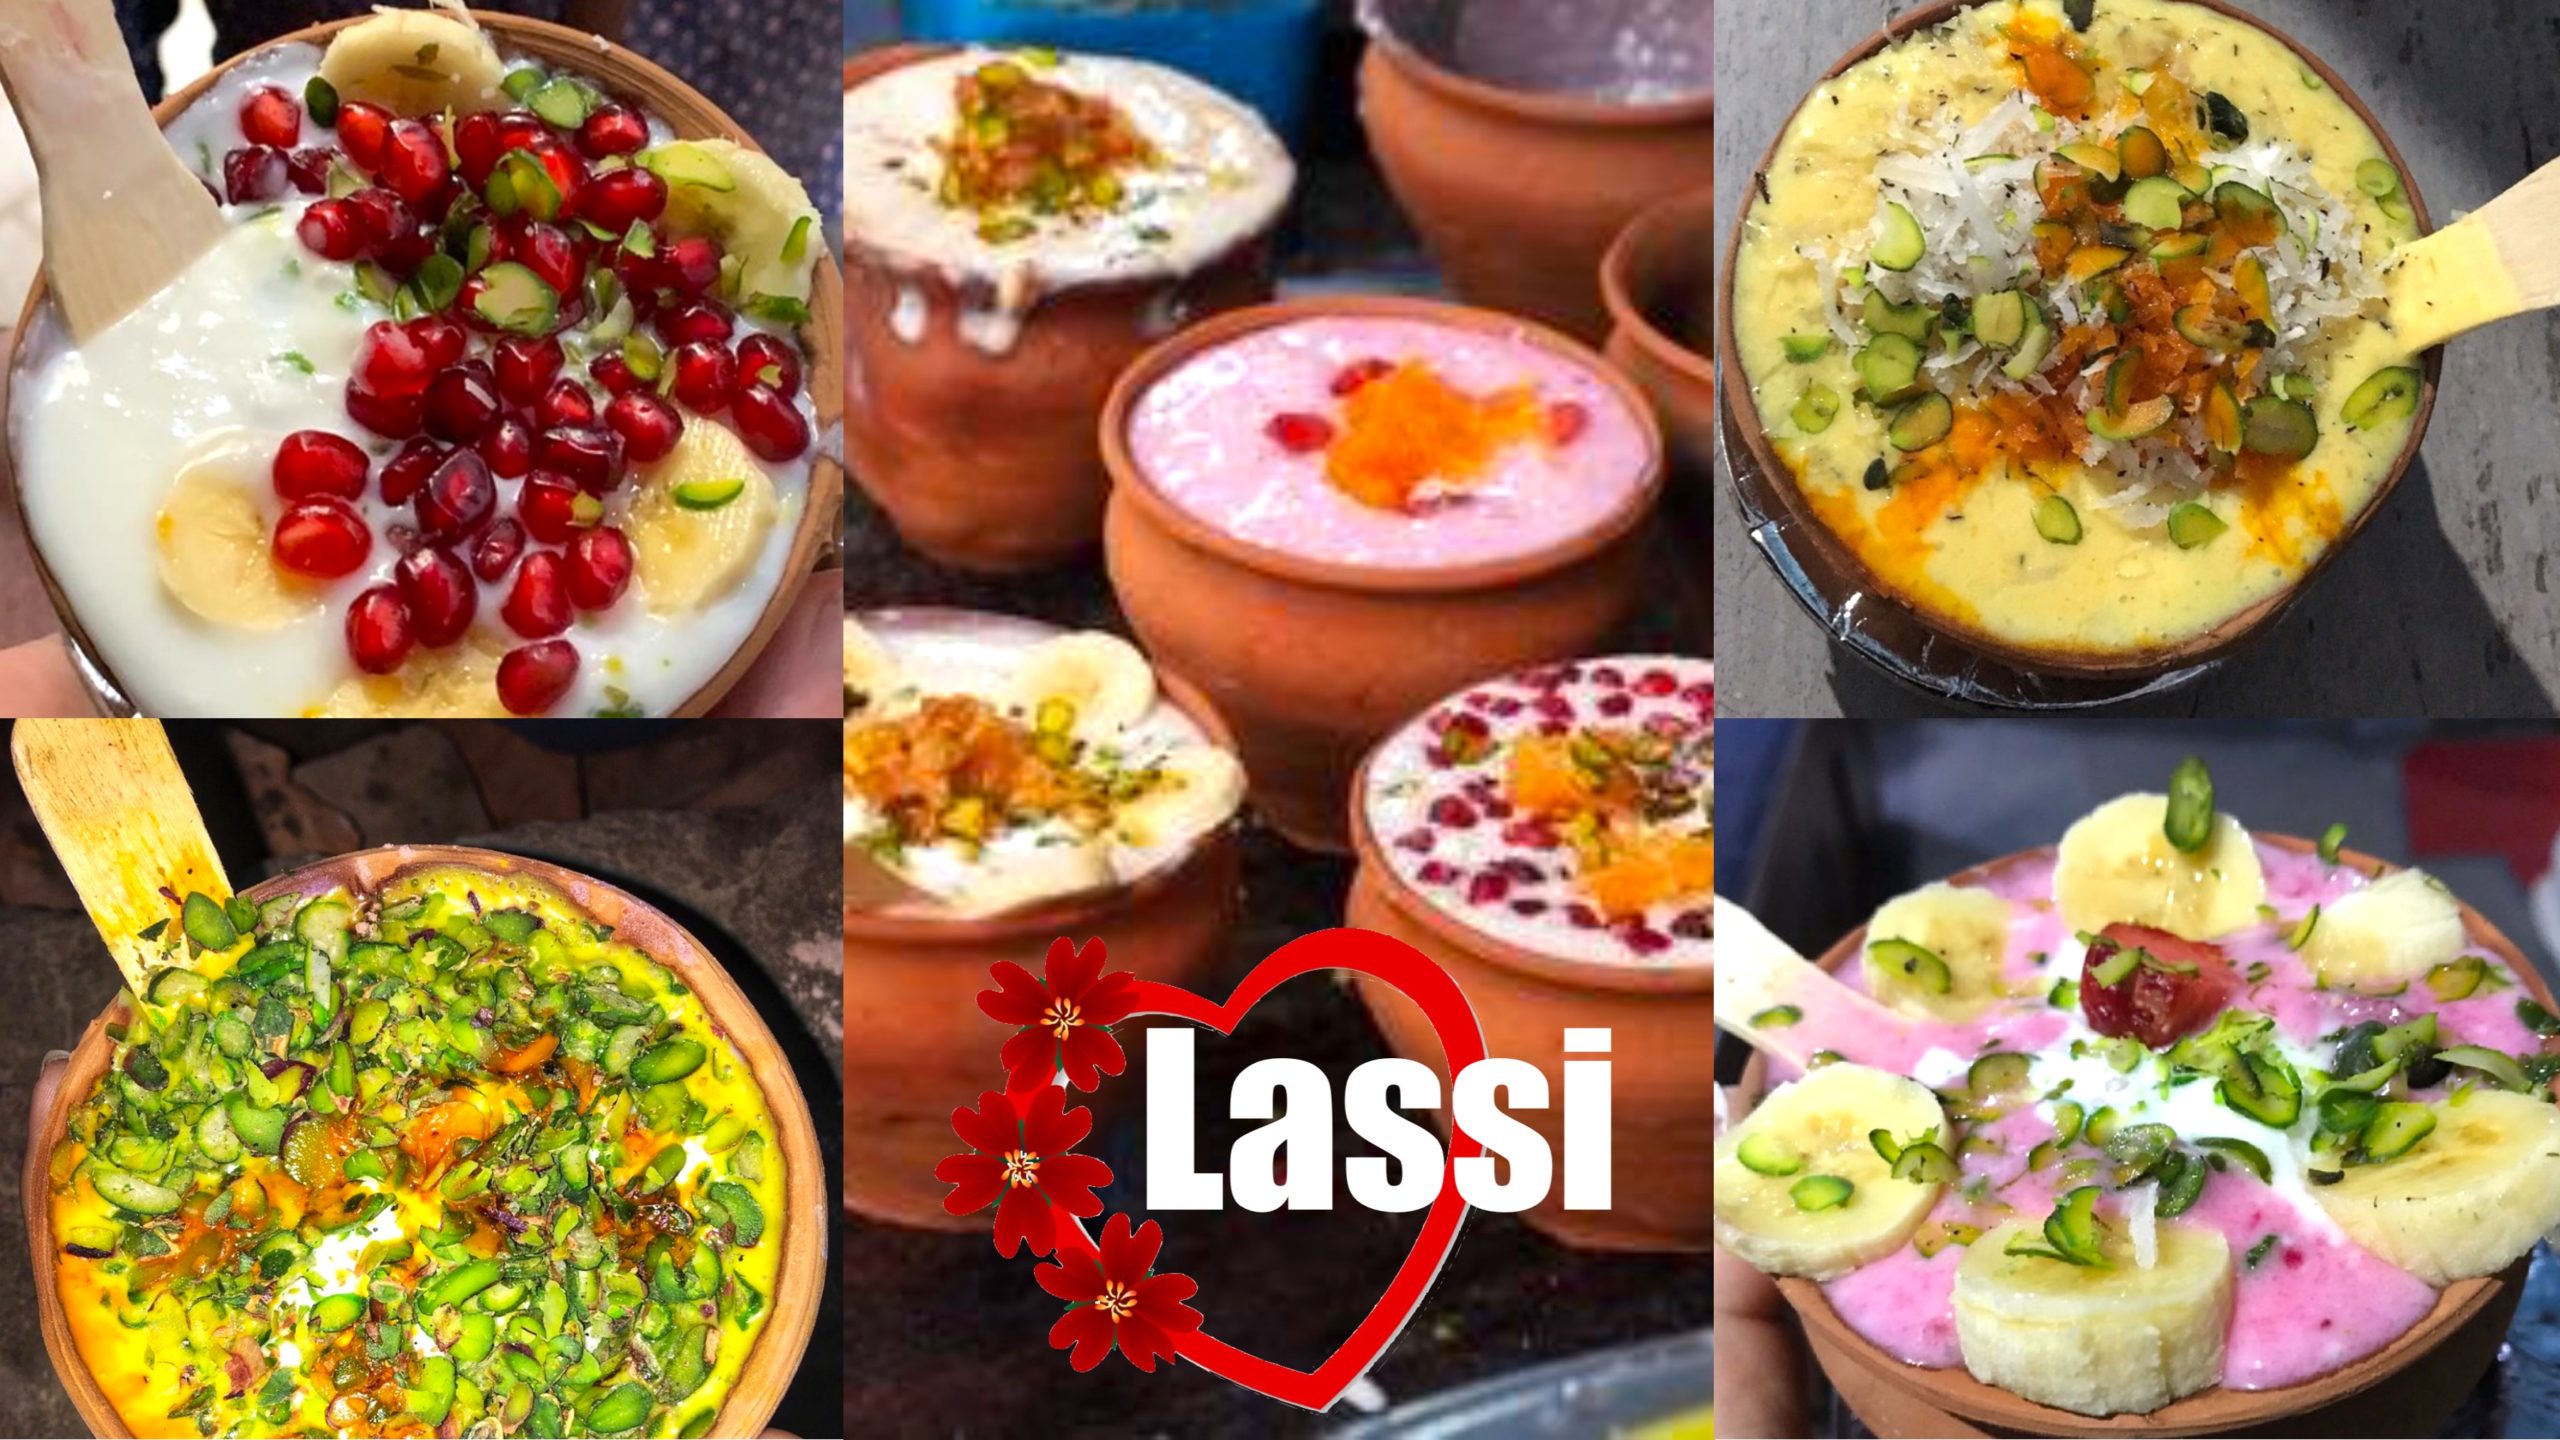 Crazy for Lassi – The Refreshing Yogurt Based Cooling Drink